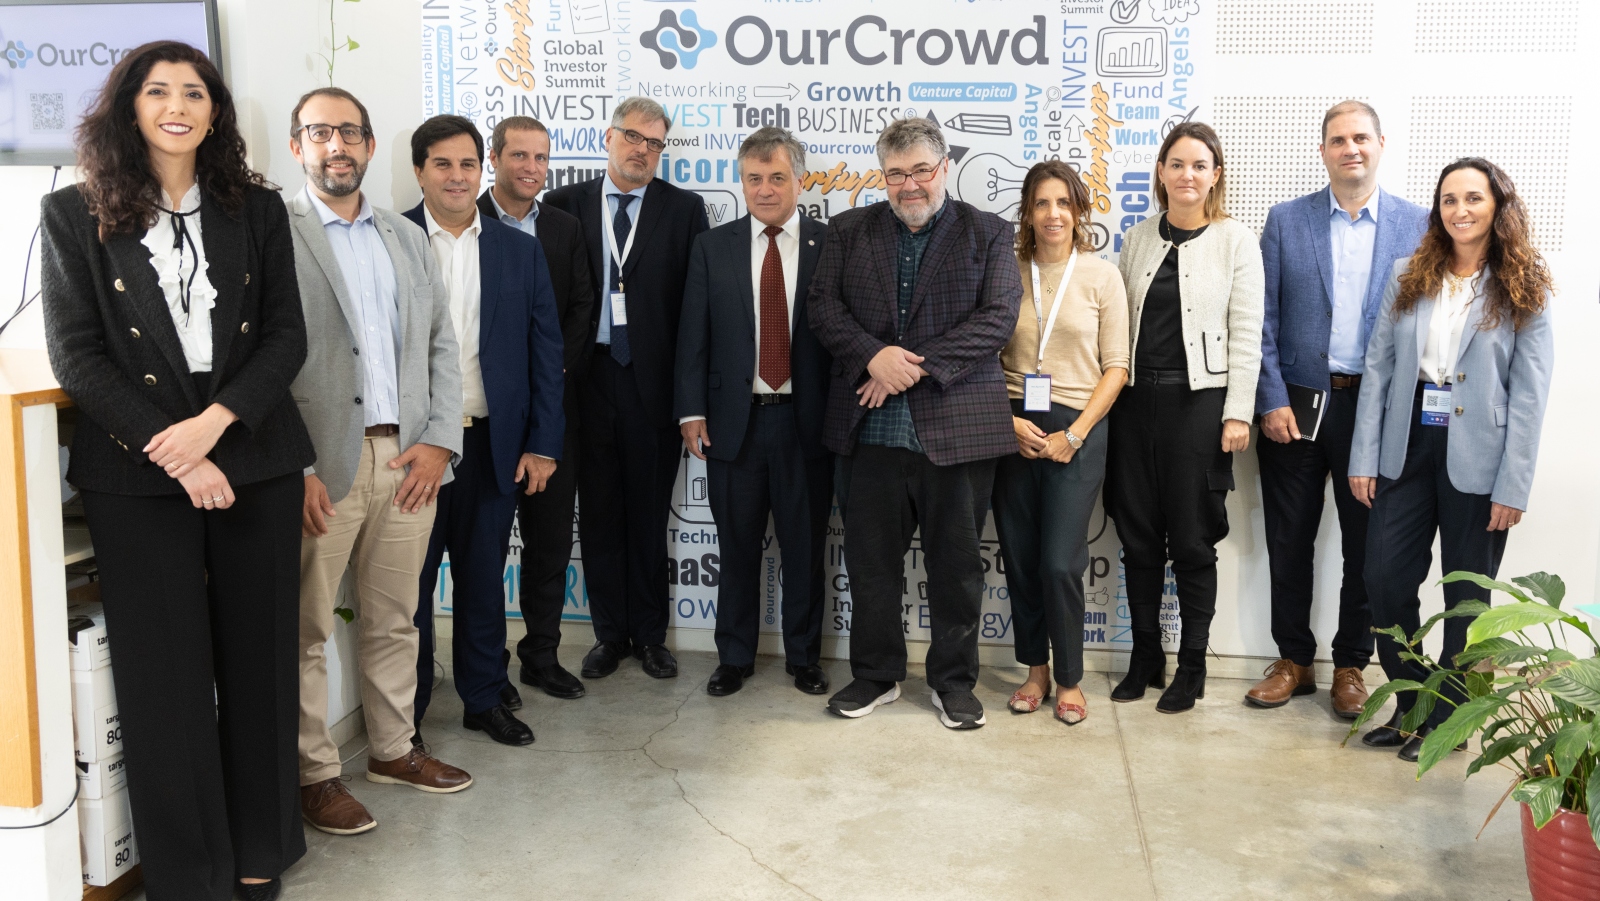 OurCrowd founder and CEO Jon Medved, center, and Head of Incubators Ori Sobovitz, fourth from left, host Uruguayan officials at OurCrowd in Jerusalem, March 26, 2023. Photo by Dudi Saad